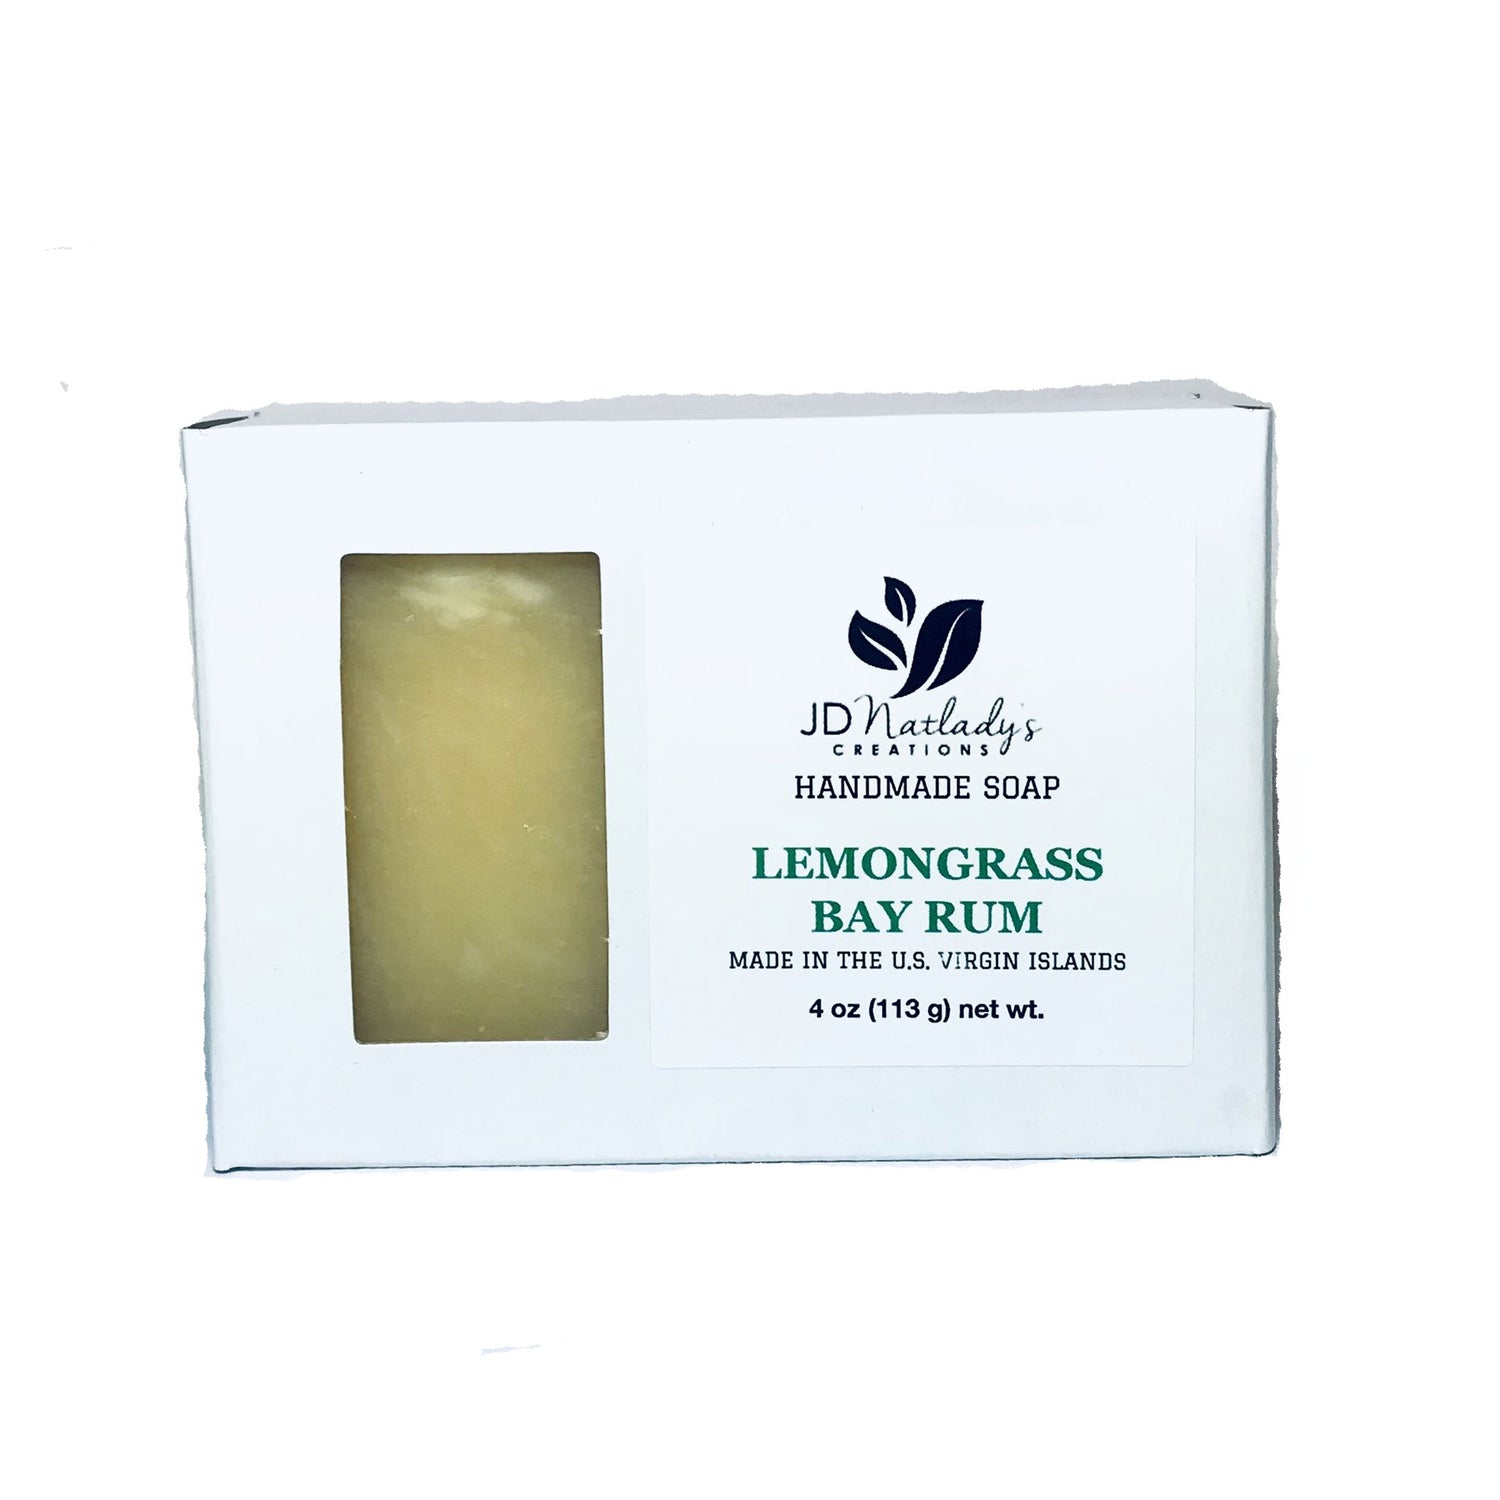 Lemongrass & Bay Rum Scented Handmade Soap at JDNatlady's Creations